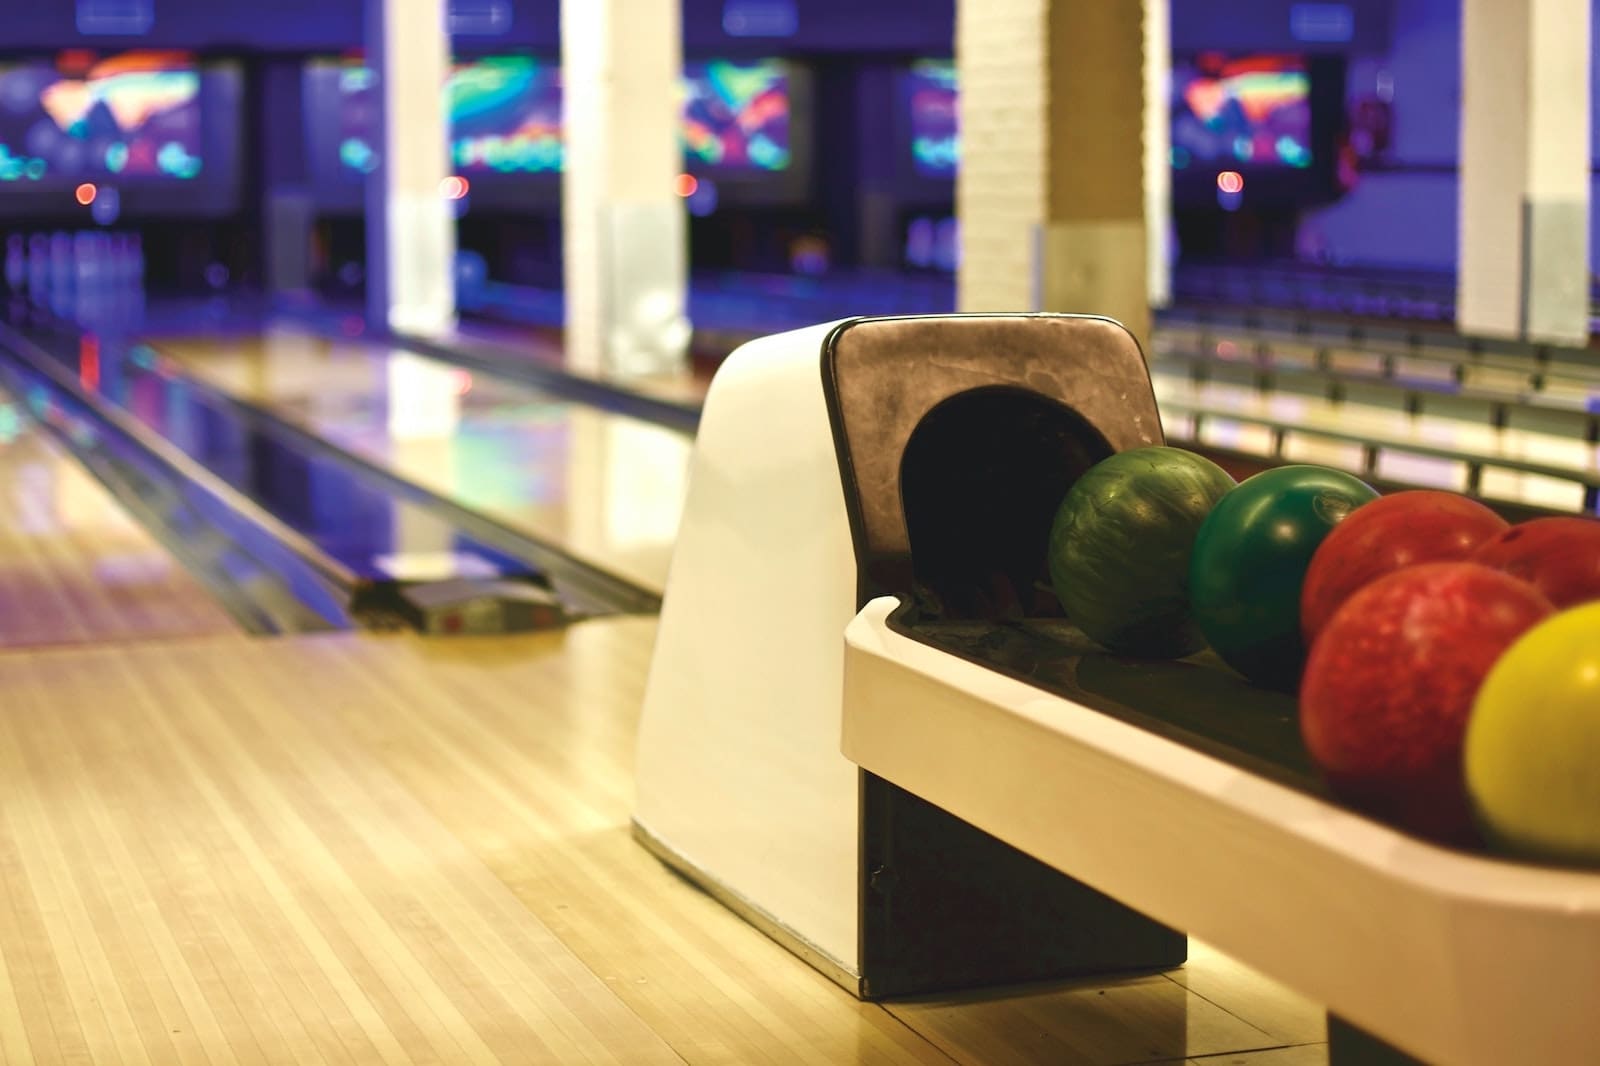 image of a bowling alley, with the ball return in the foreground and the bowling pins in the background.